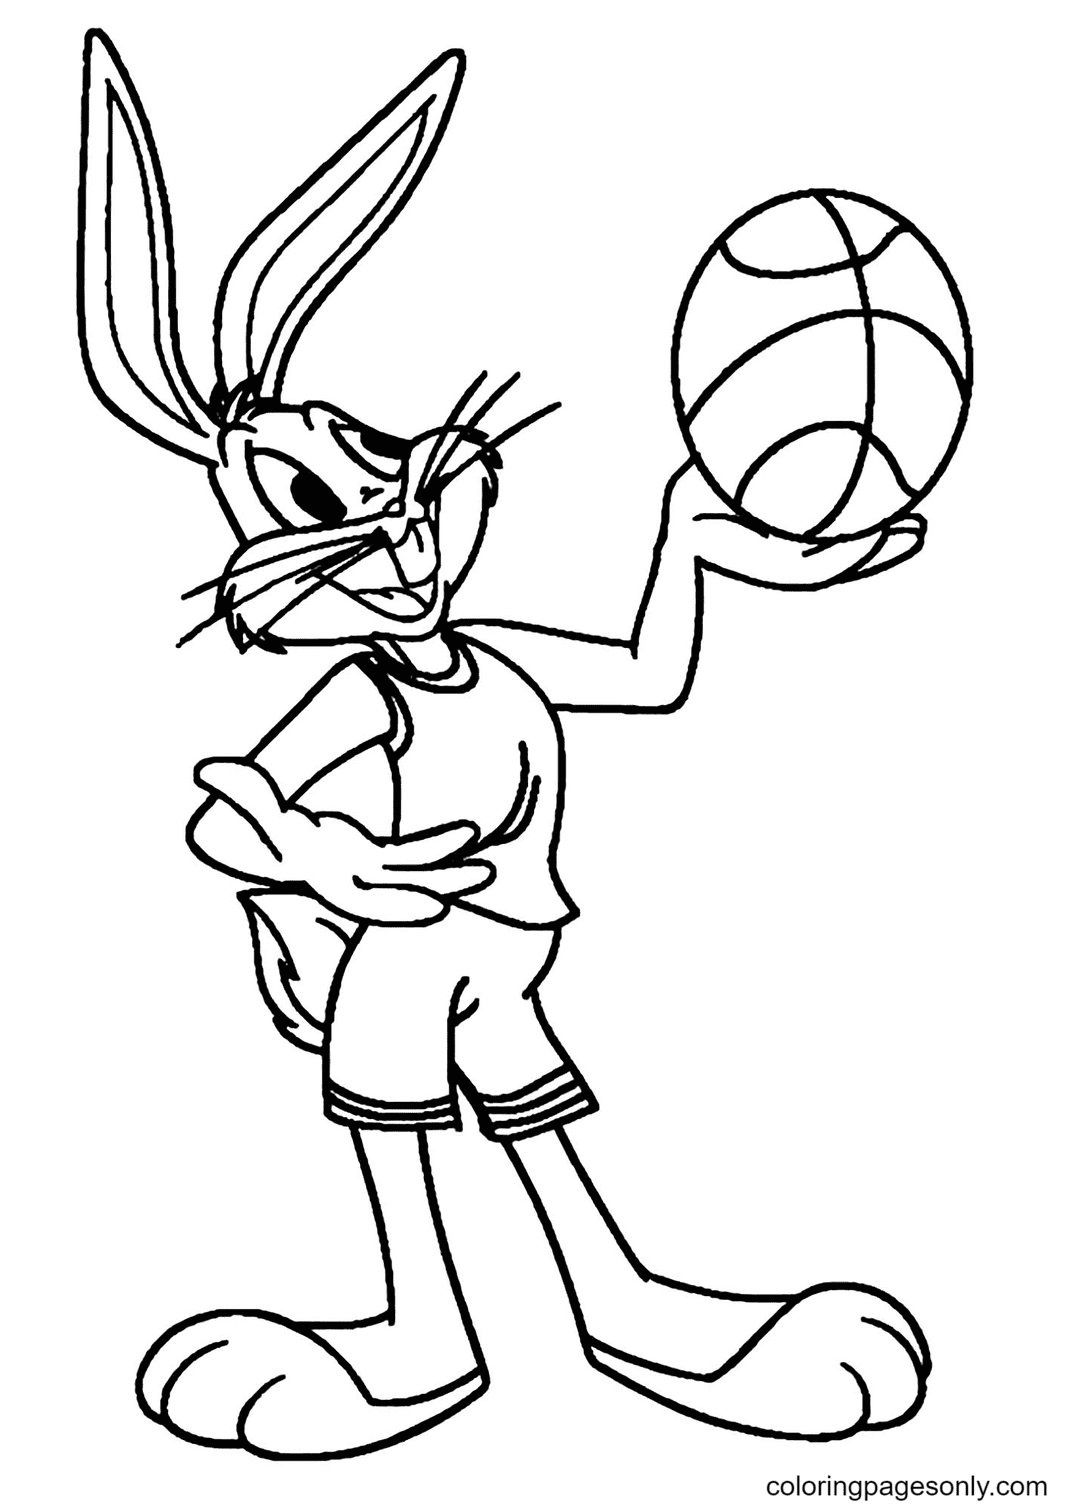 Bugs Bunny Holding A Basketball Coloring Pages